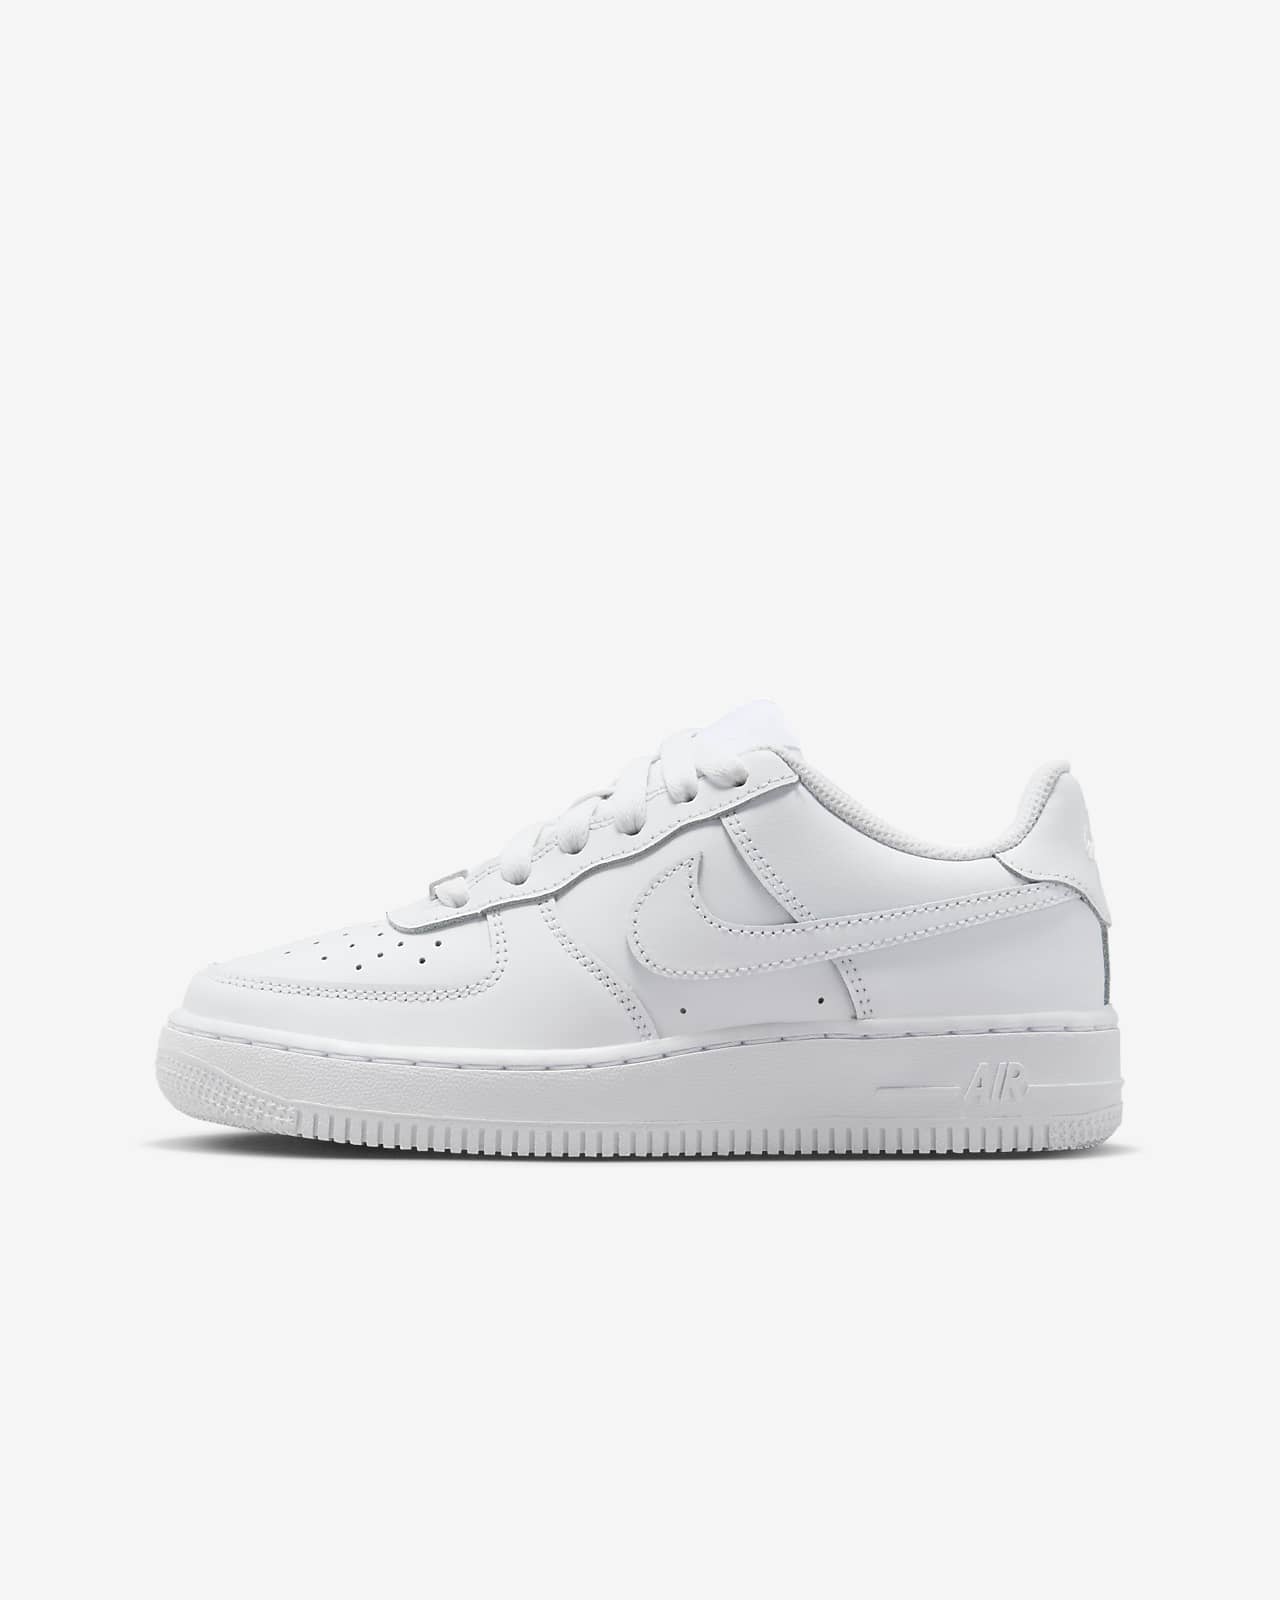 Nike Air Force 1 LE Younger/Older Kids' Shoes. Nike LU